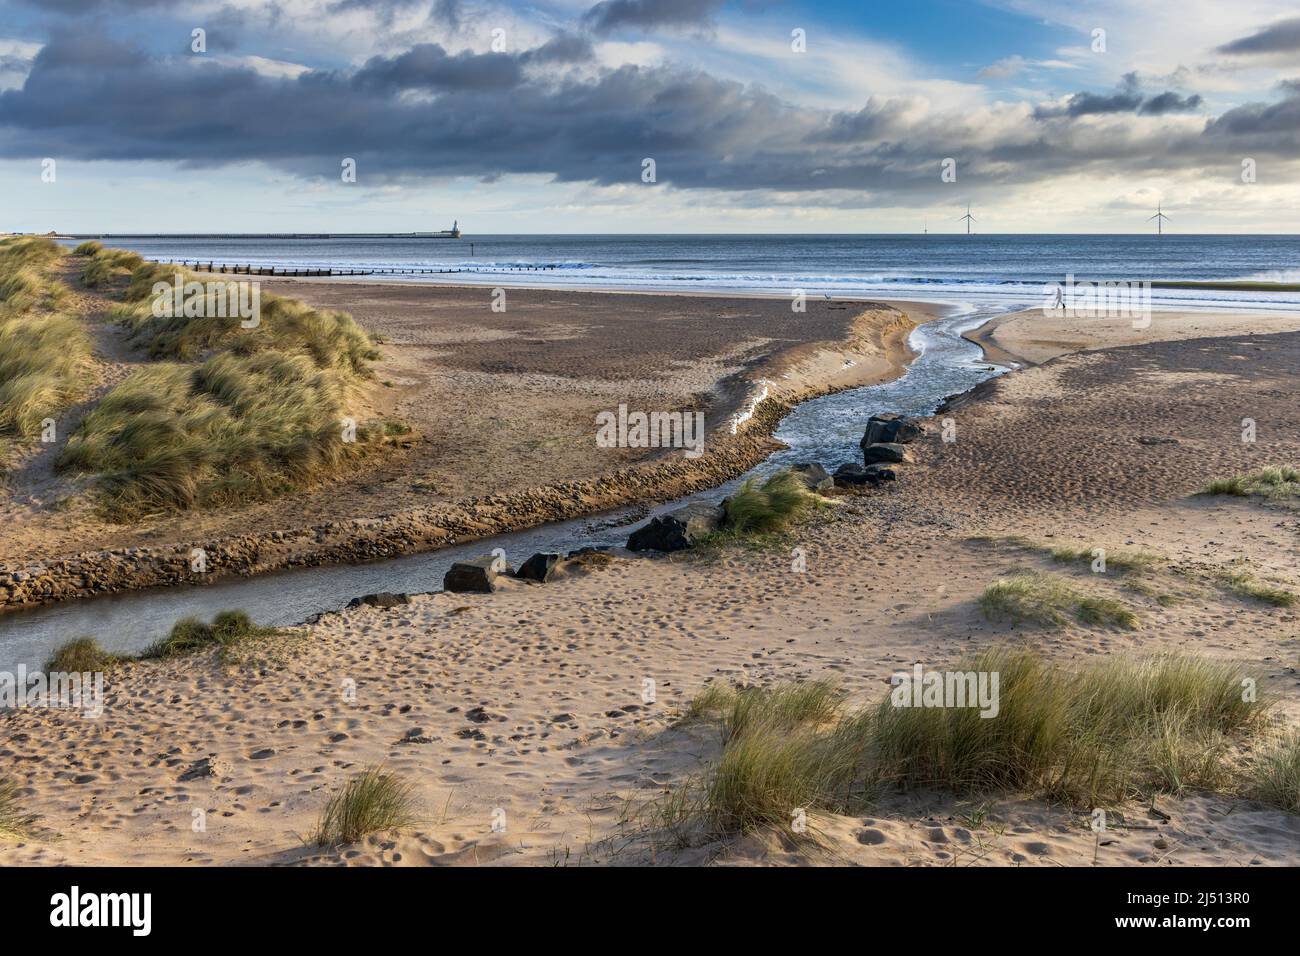 The sand dunes and long sandy beach at Blyth, Northumberland. Blyth harbour lighthouse can be seen in the distance. Stock Photo